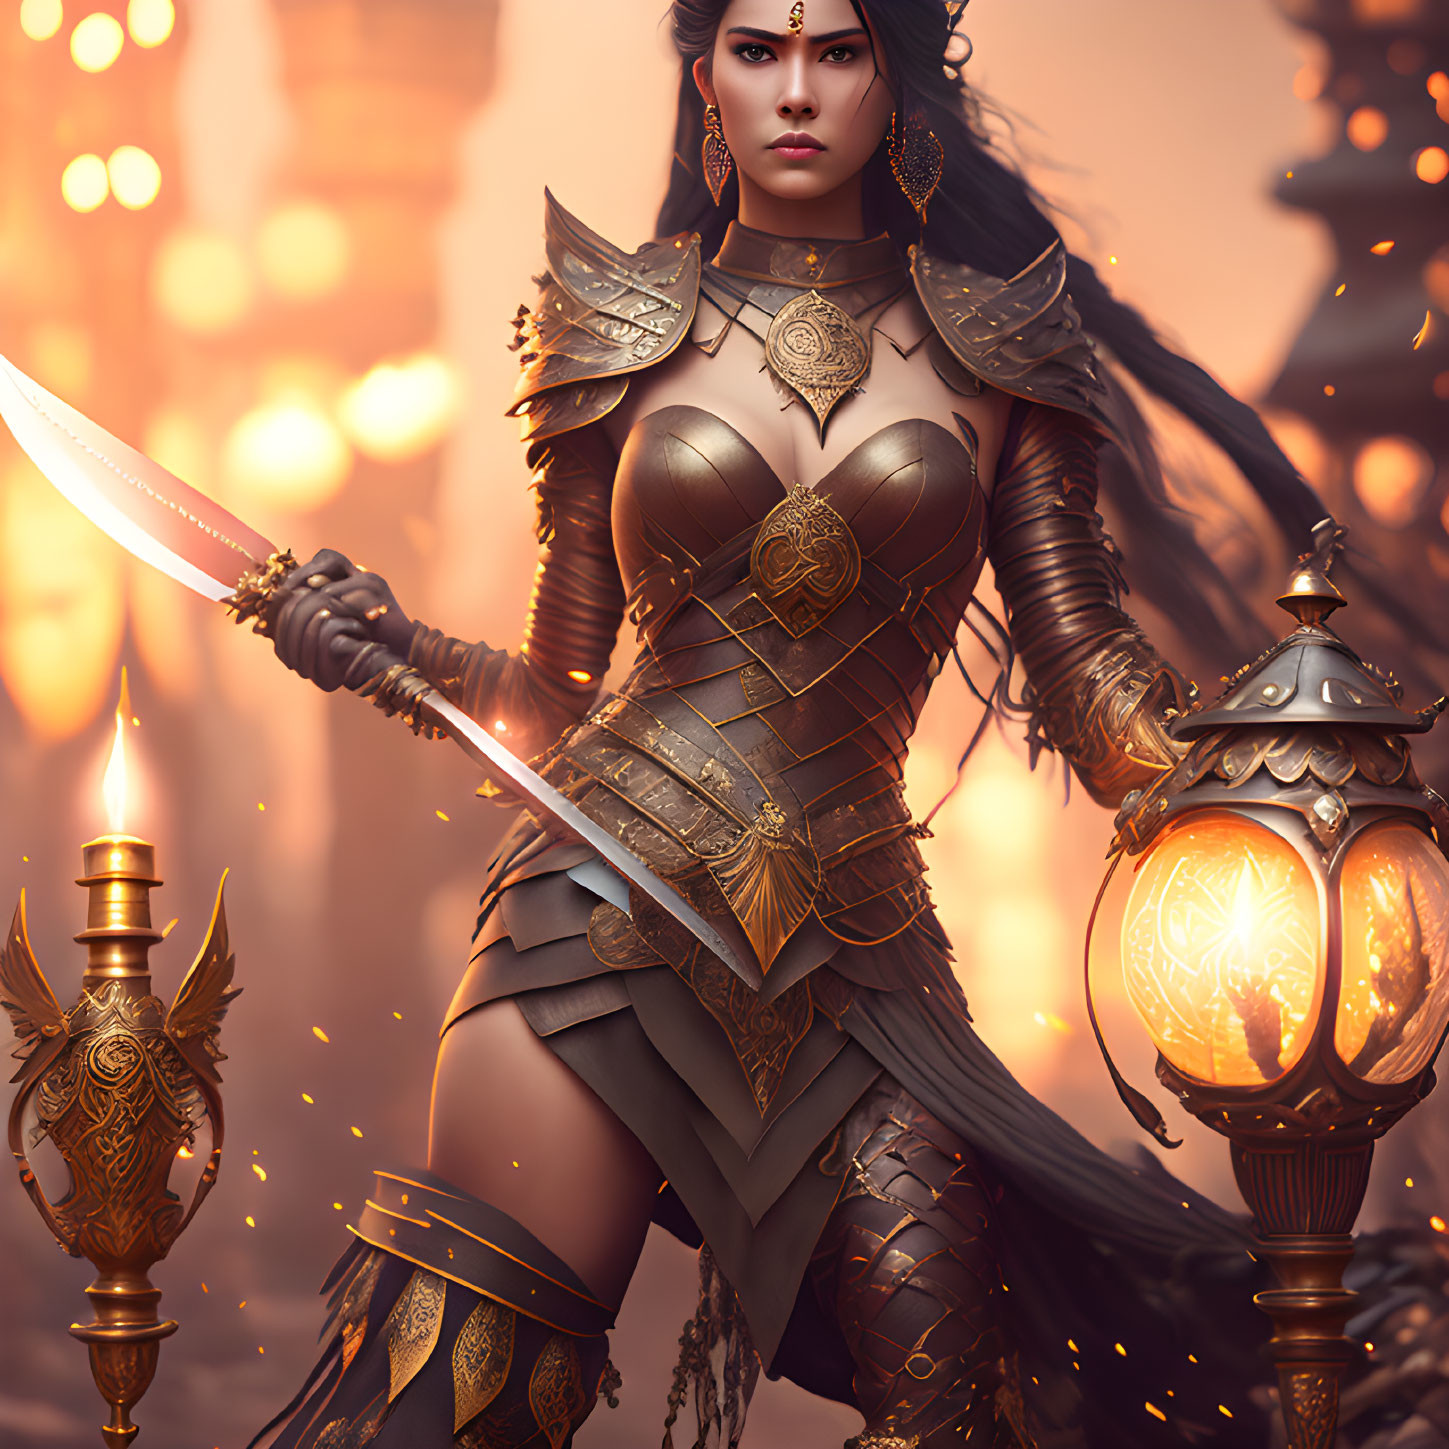 Warrior woman in ornate armor with sword among glowing lanterns